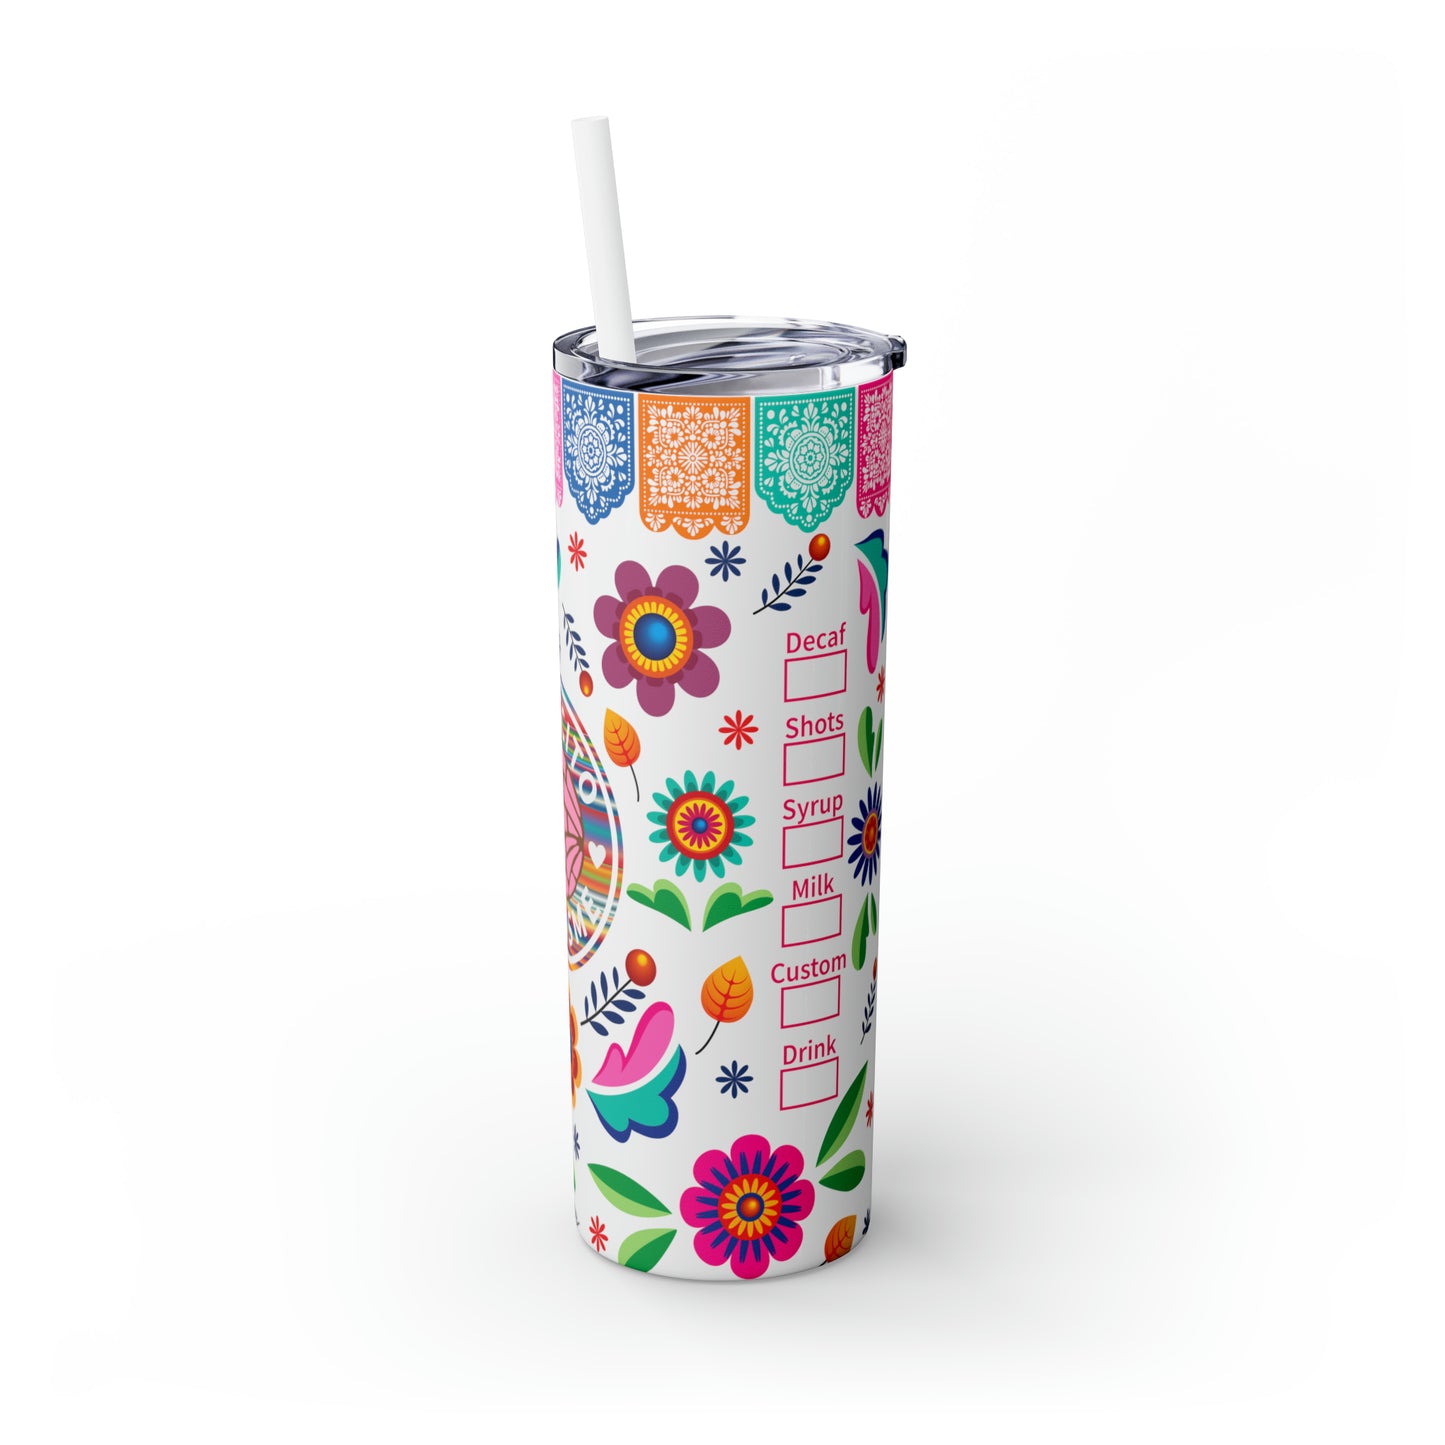 Cafecito y chisme Skinny Tumbler with Straw, 20oz for Mexican friend, comadre, madrina, ahijada or Latin people. Christmas gift for her